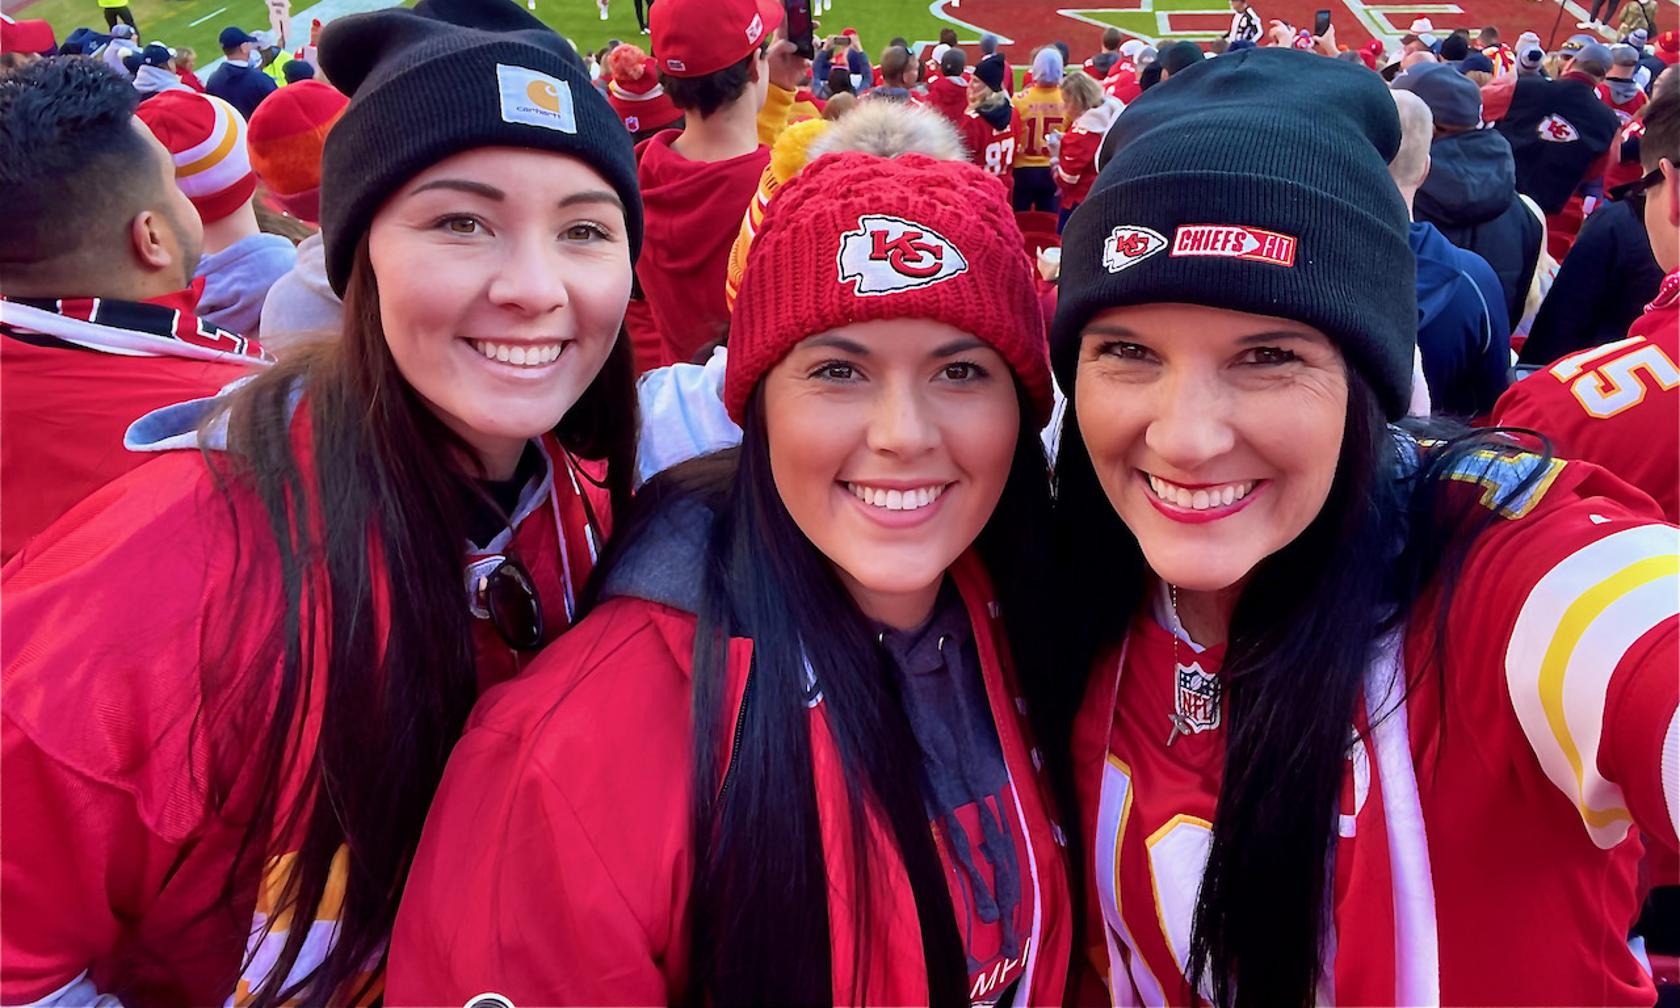 Shelly Grimes and her daughters at a Chiefs game